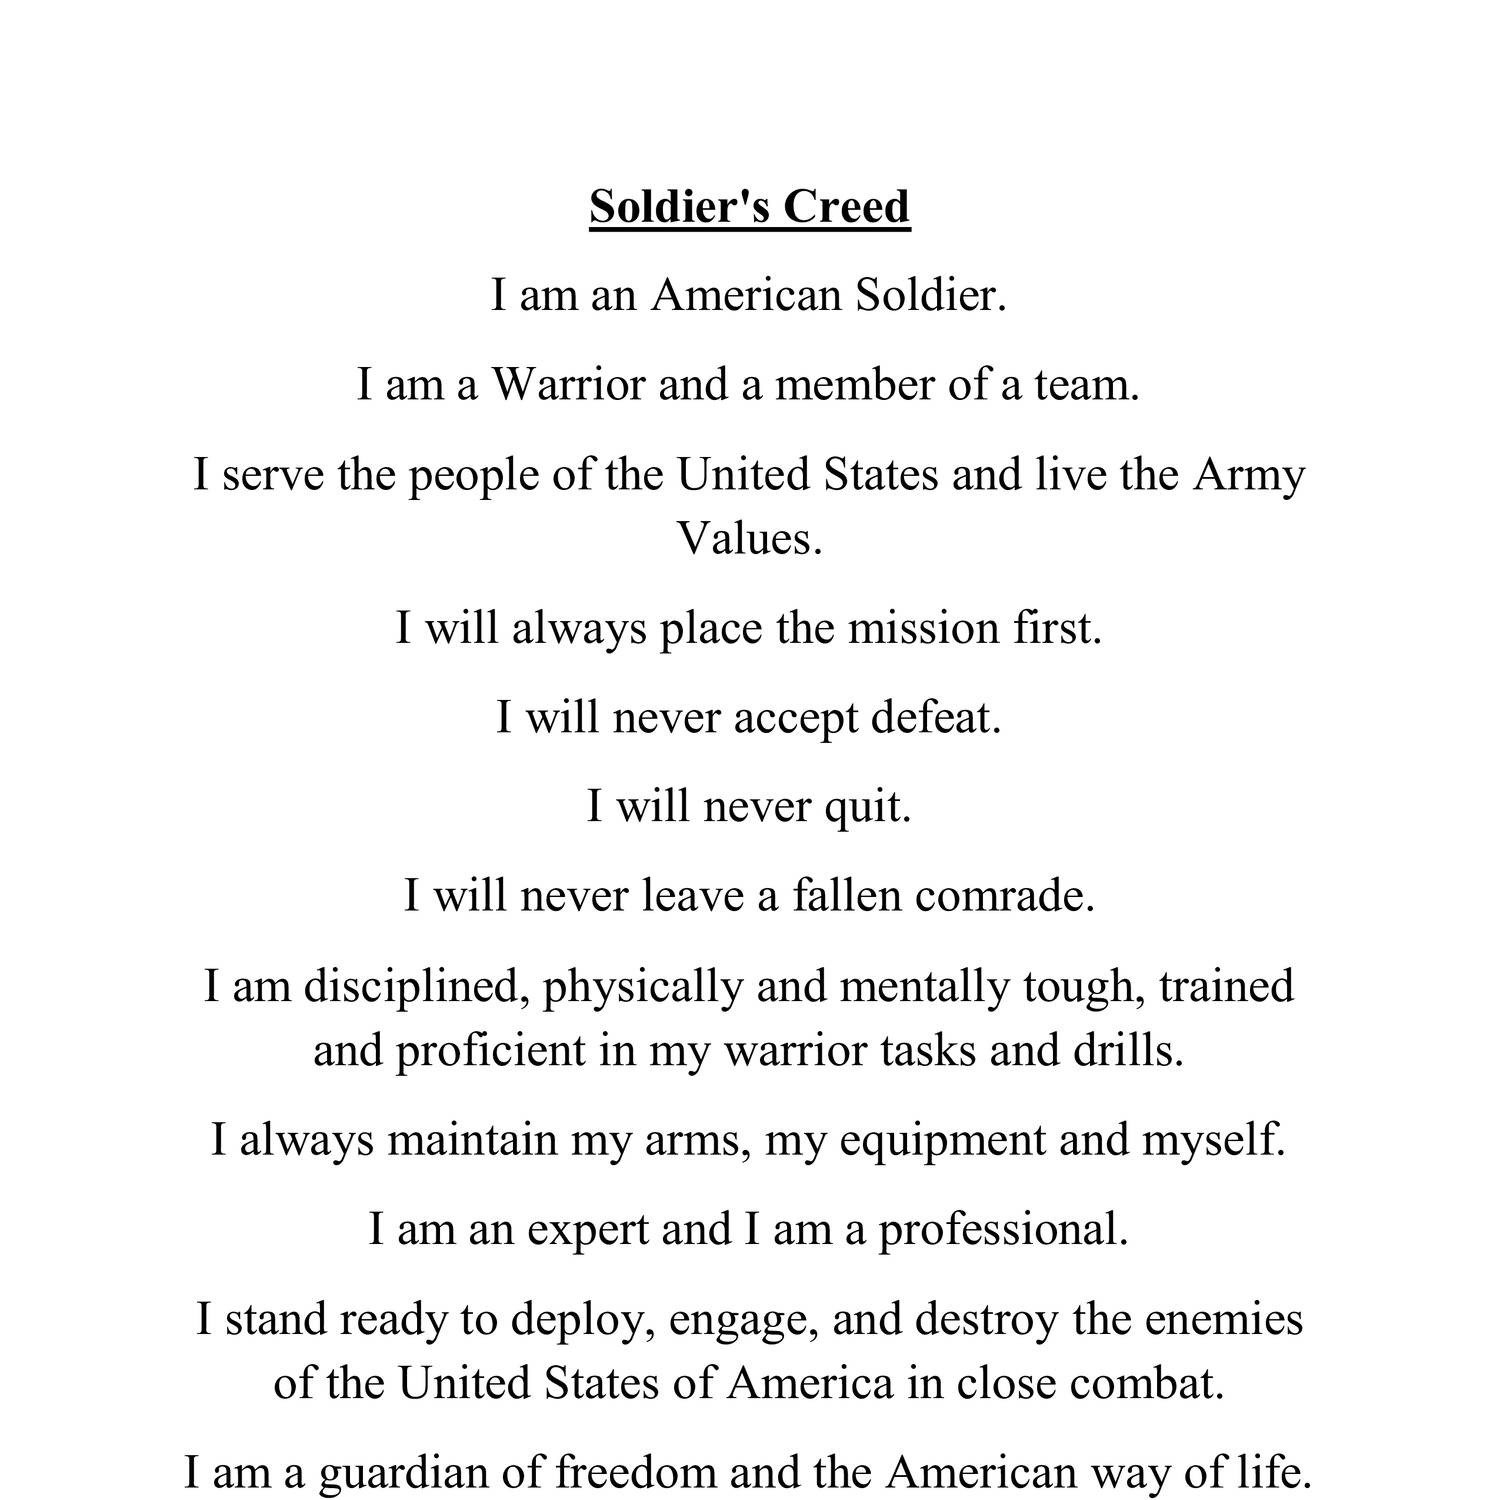 Soldier Creed.pdf